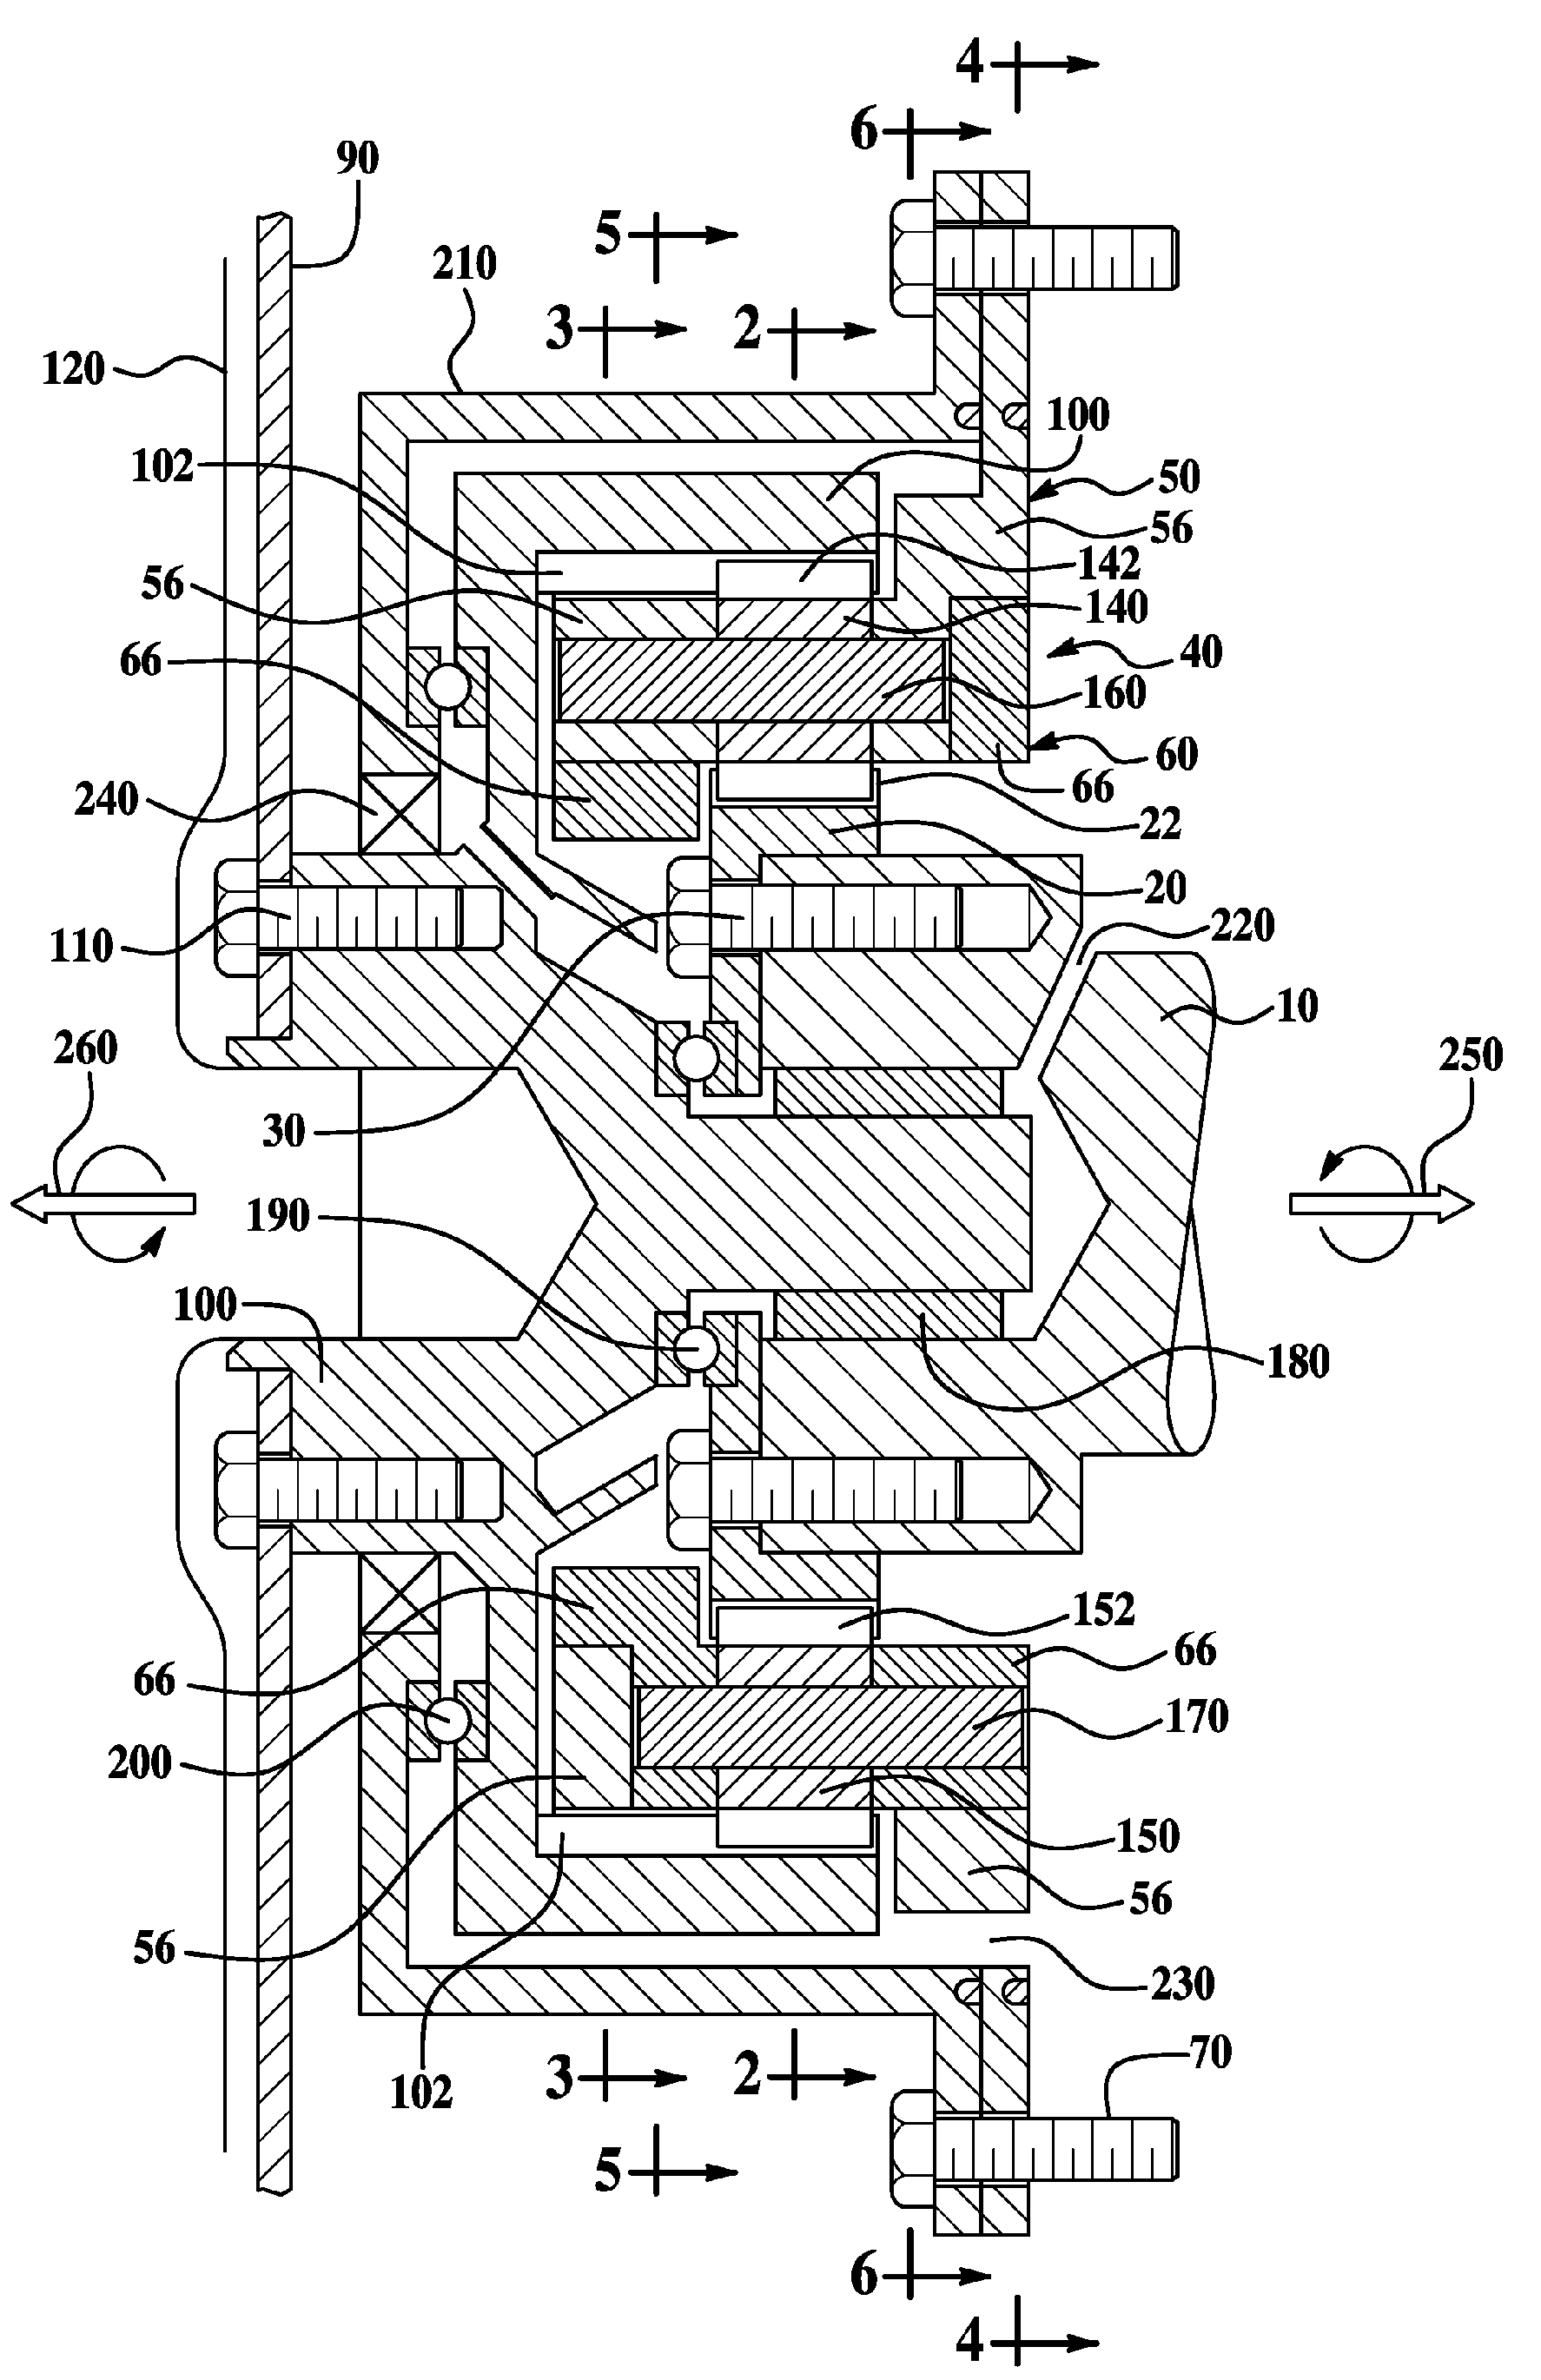 System and method for reducing backlash in a planetary gear set